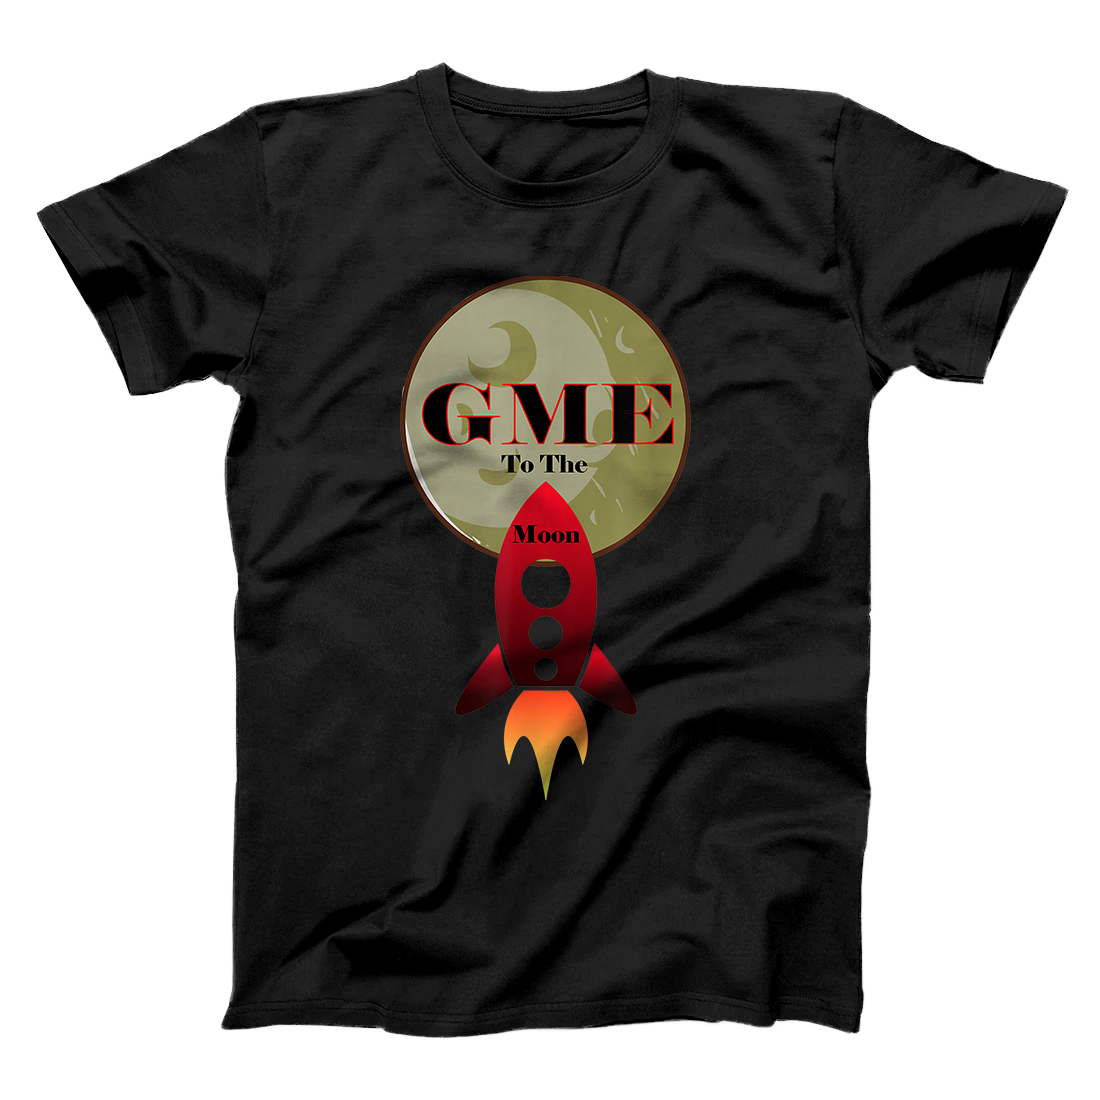 Personalized GME To The Moon Tshirt x Stonk Investor tshirt and Daytrader T-Shirt